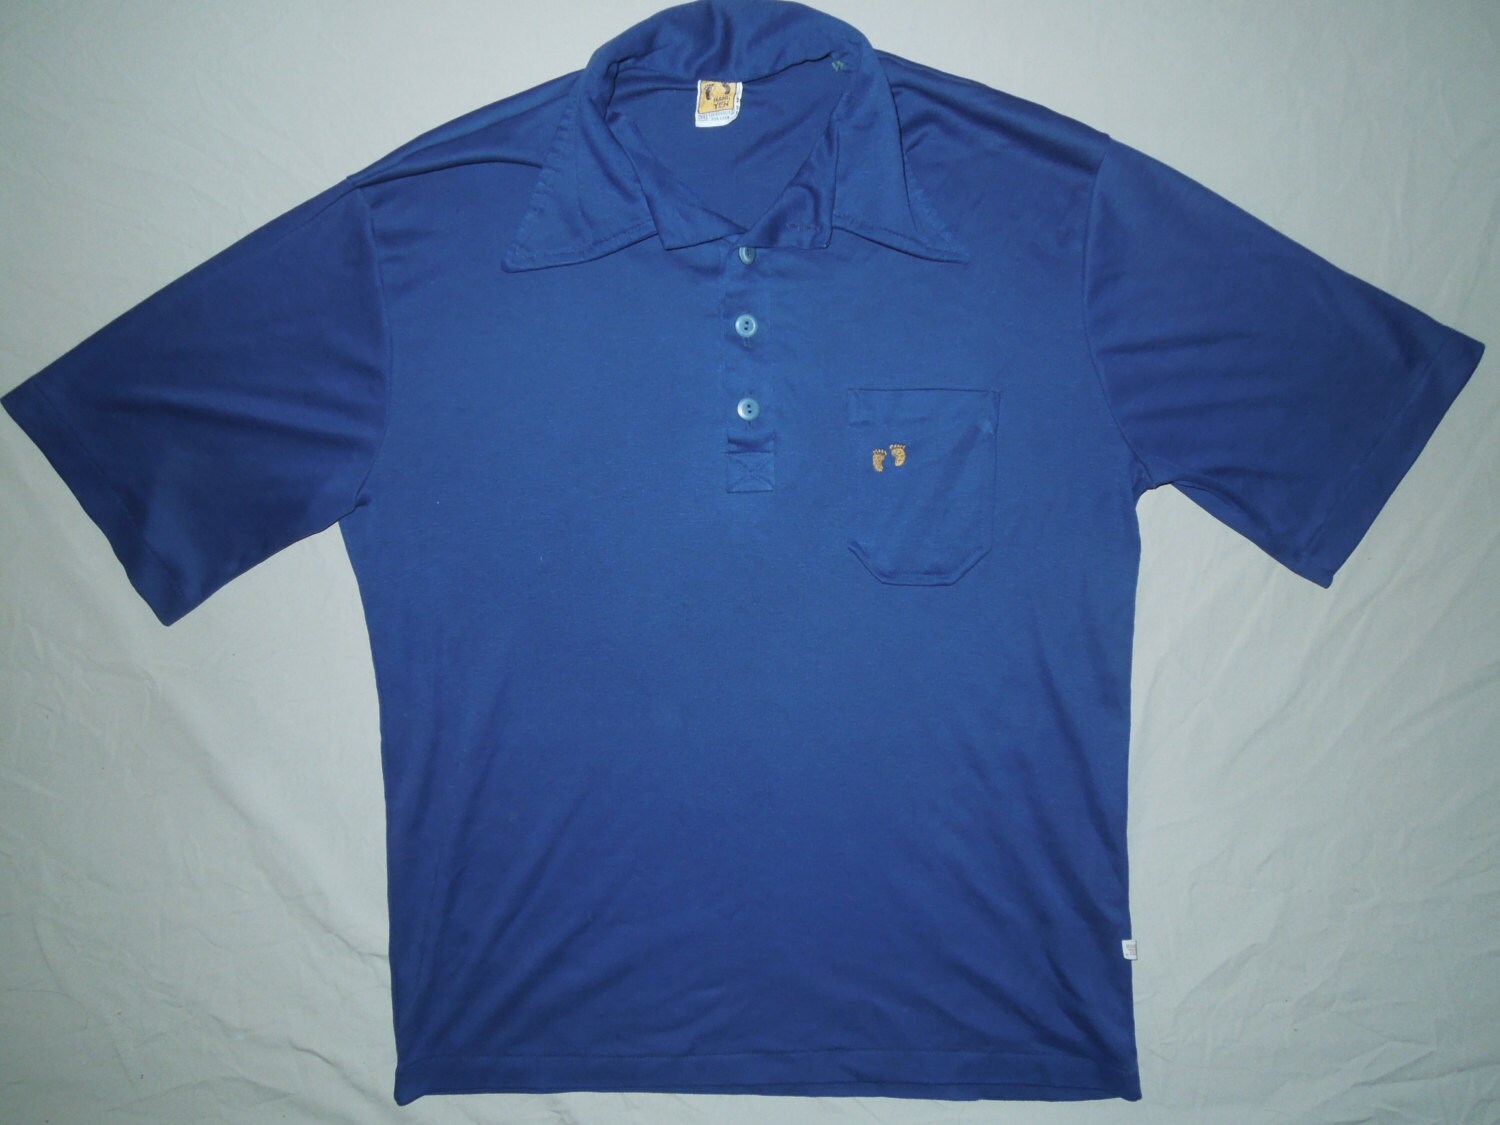 Vintage 70's Hang Ten Polo Shirt Size M by LzVintage on Etsy